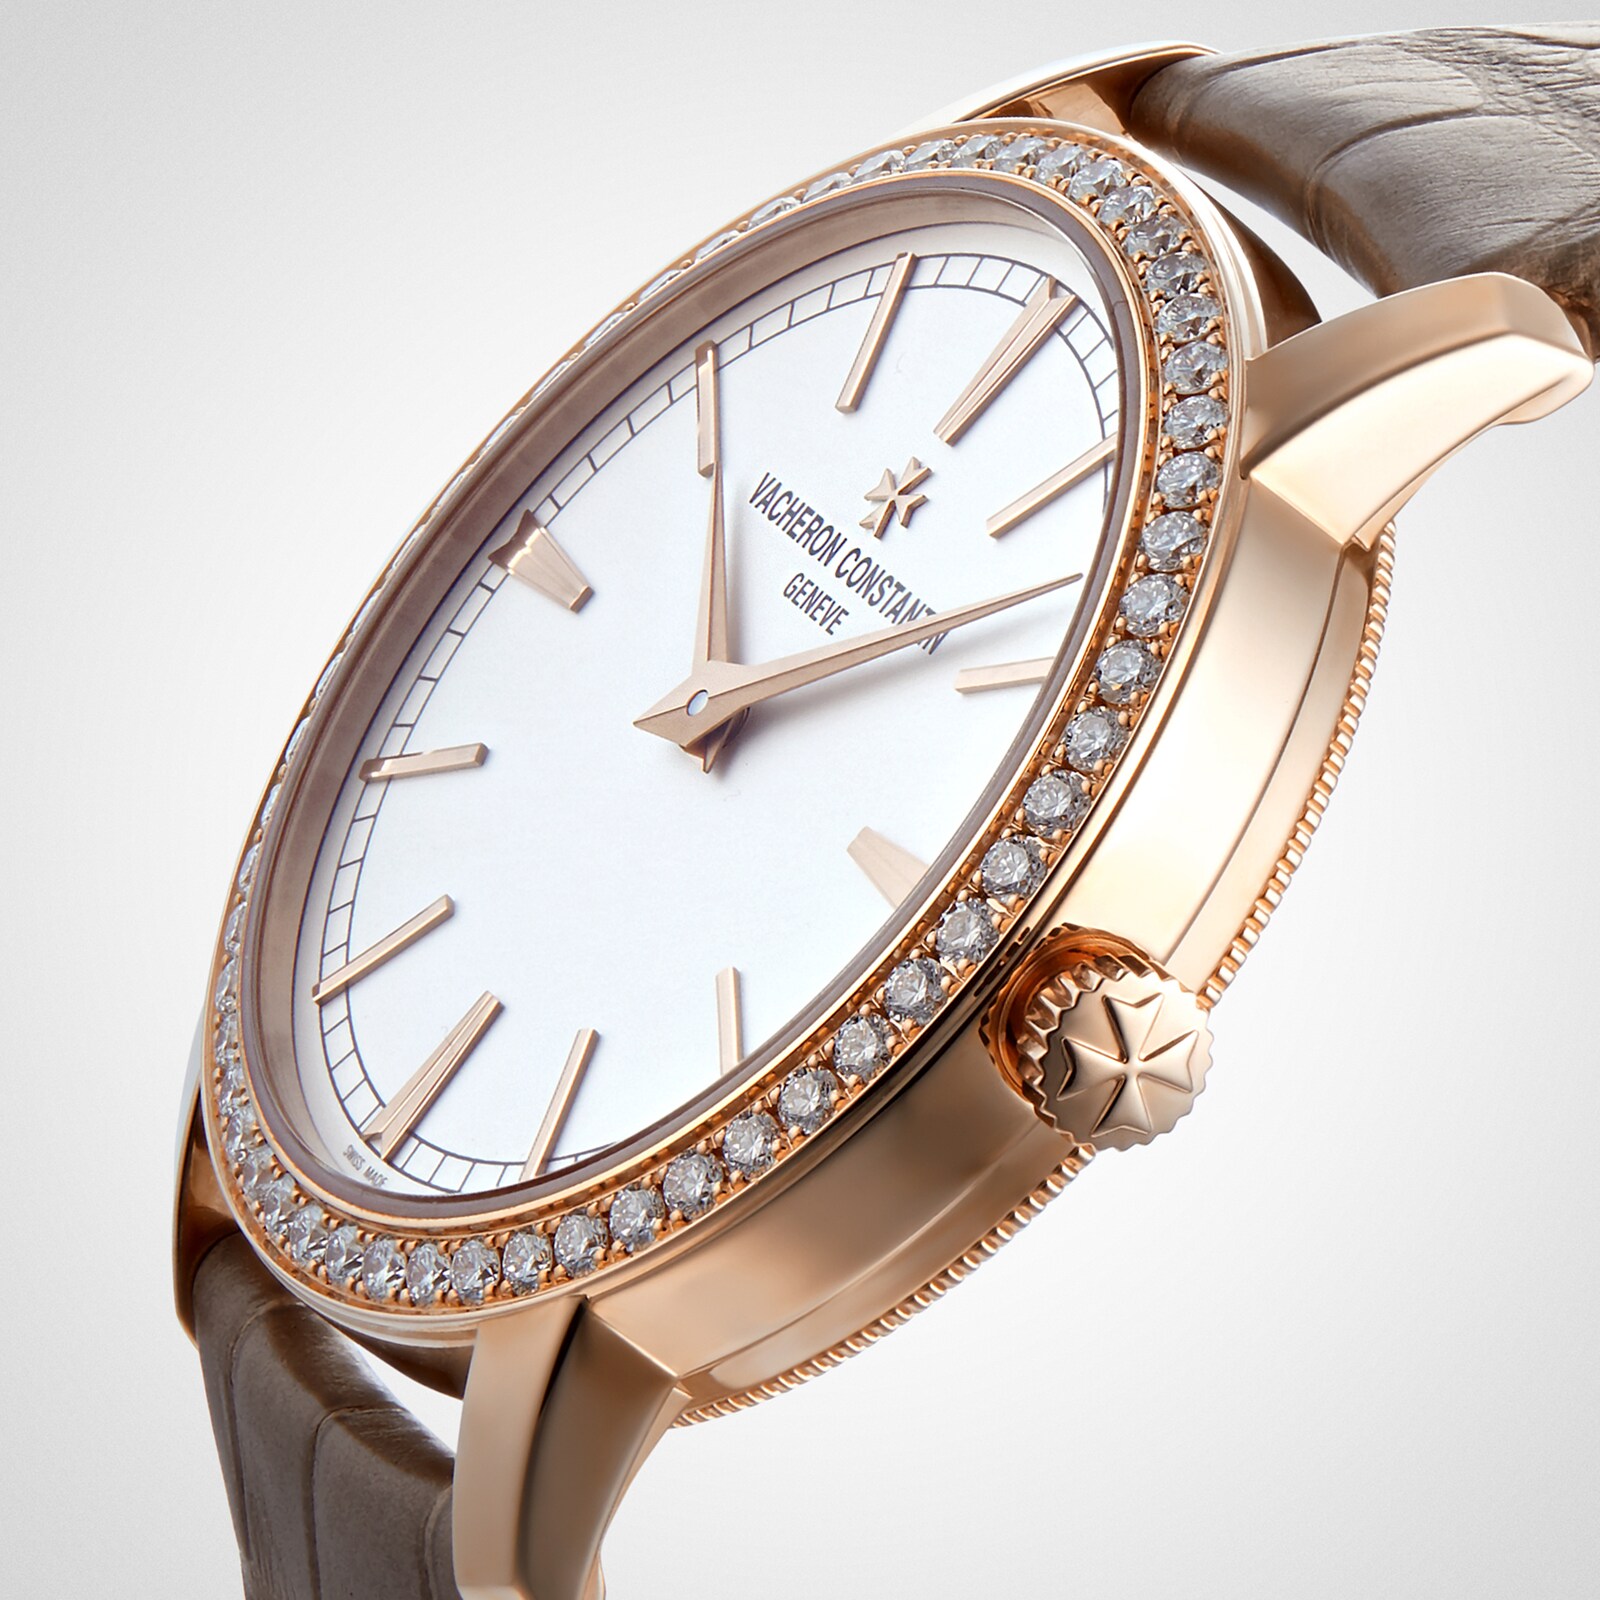 Vacheron Constantin Traditionnelle 81590/000R-9847 | Watches Of ...